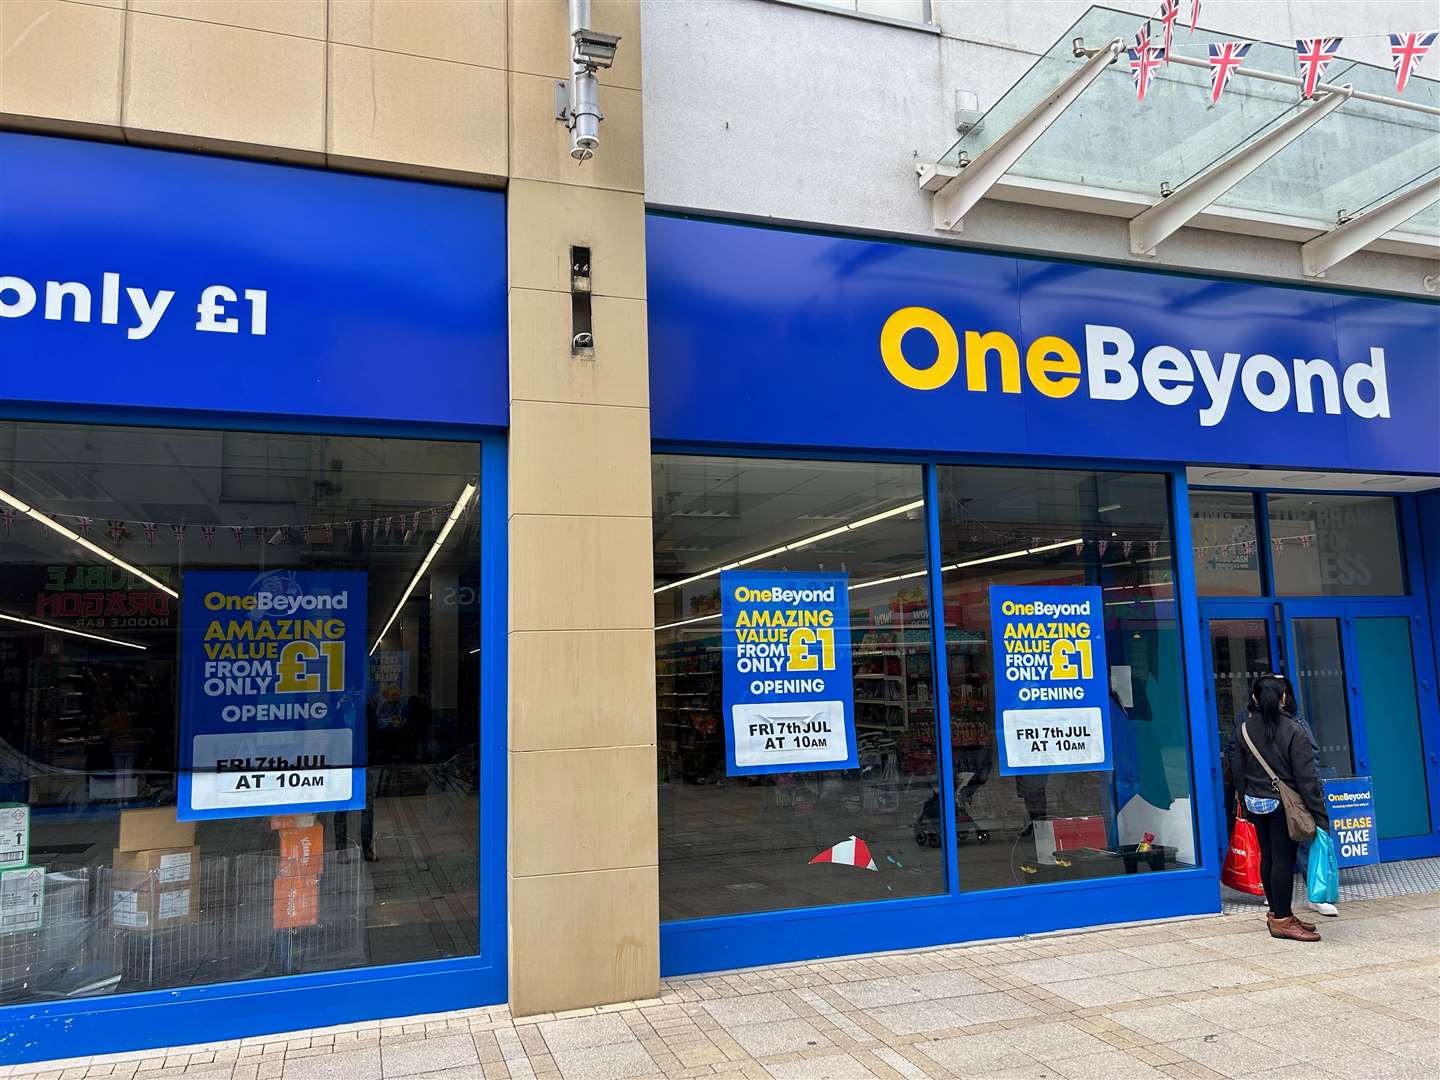 A new OneBeyond store looks set to open in Lynn this Friday